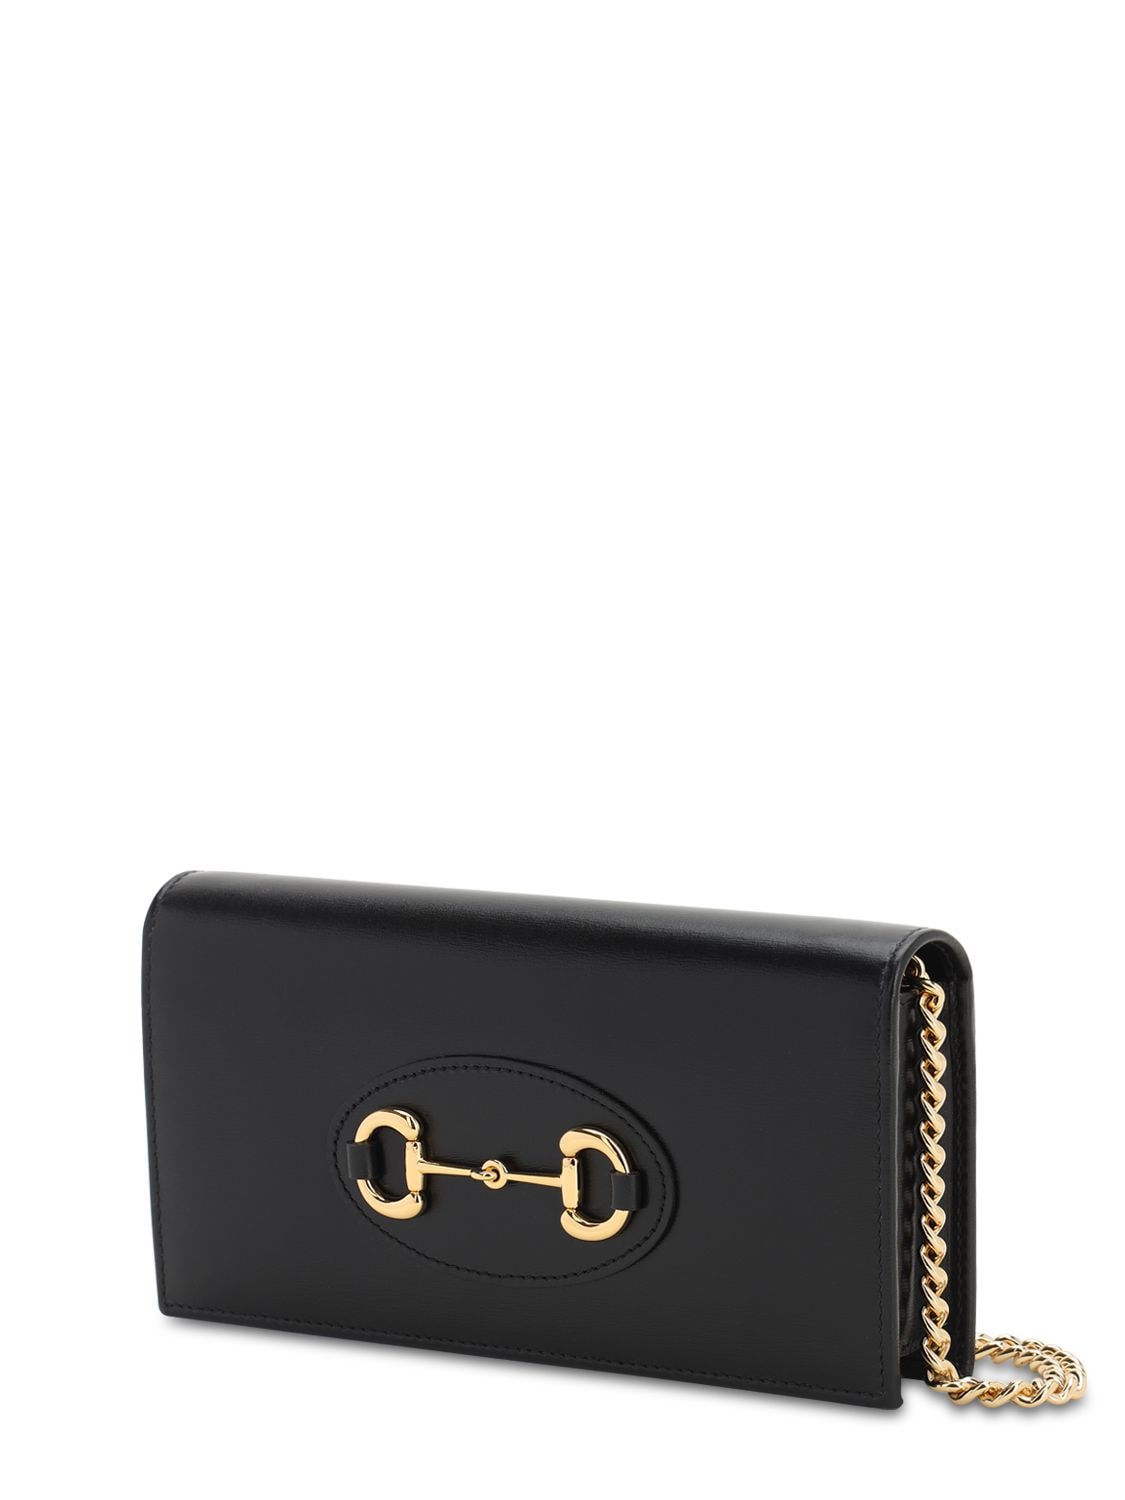 Gucci 1955 Horsebit Leather Wallet On A Chain In Black Leather | ModeSens